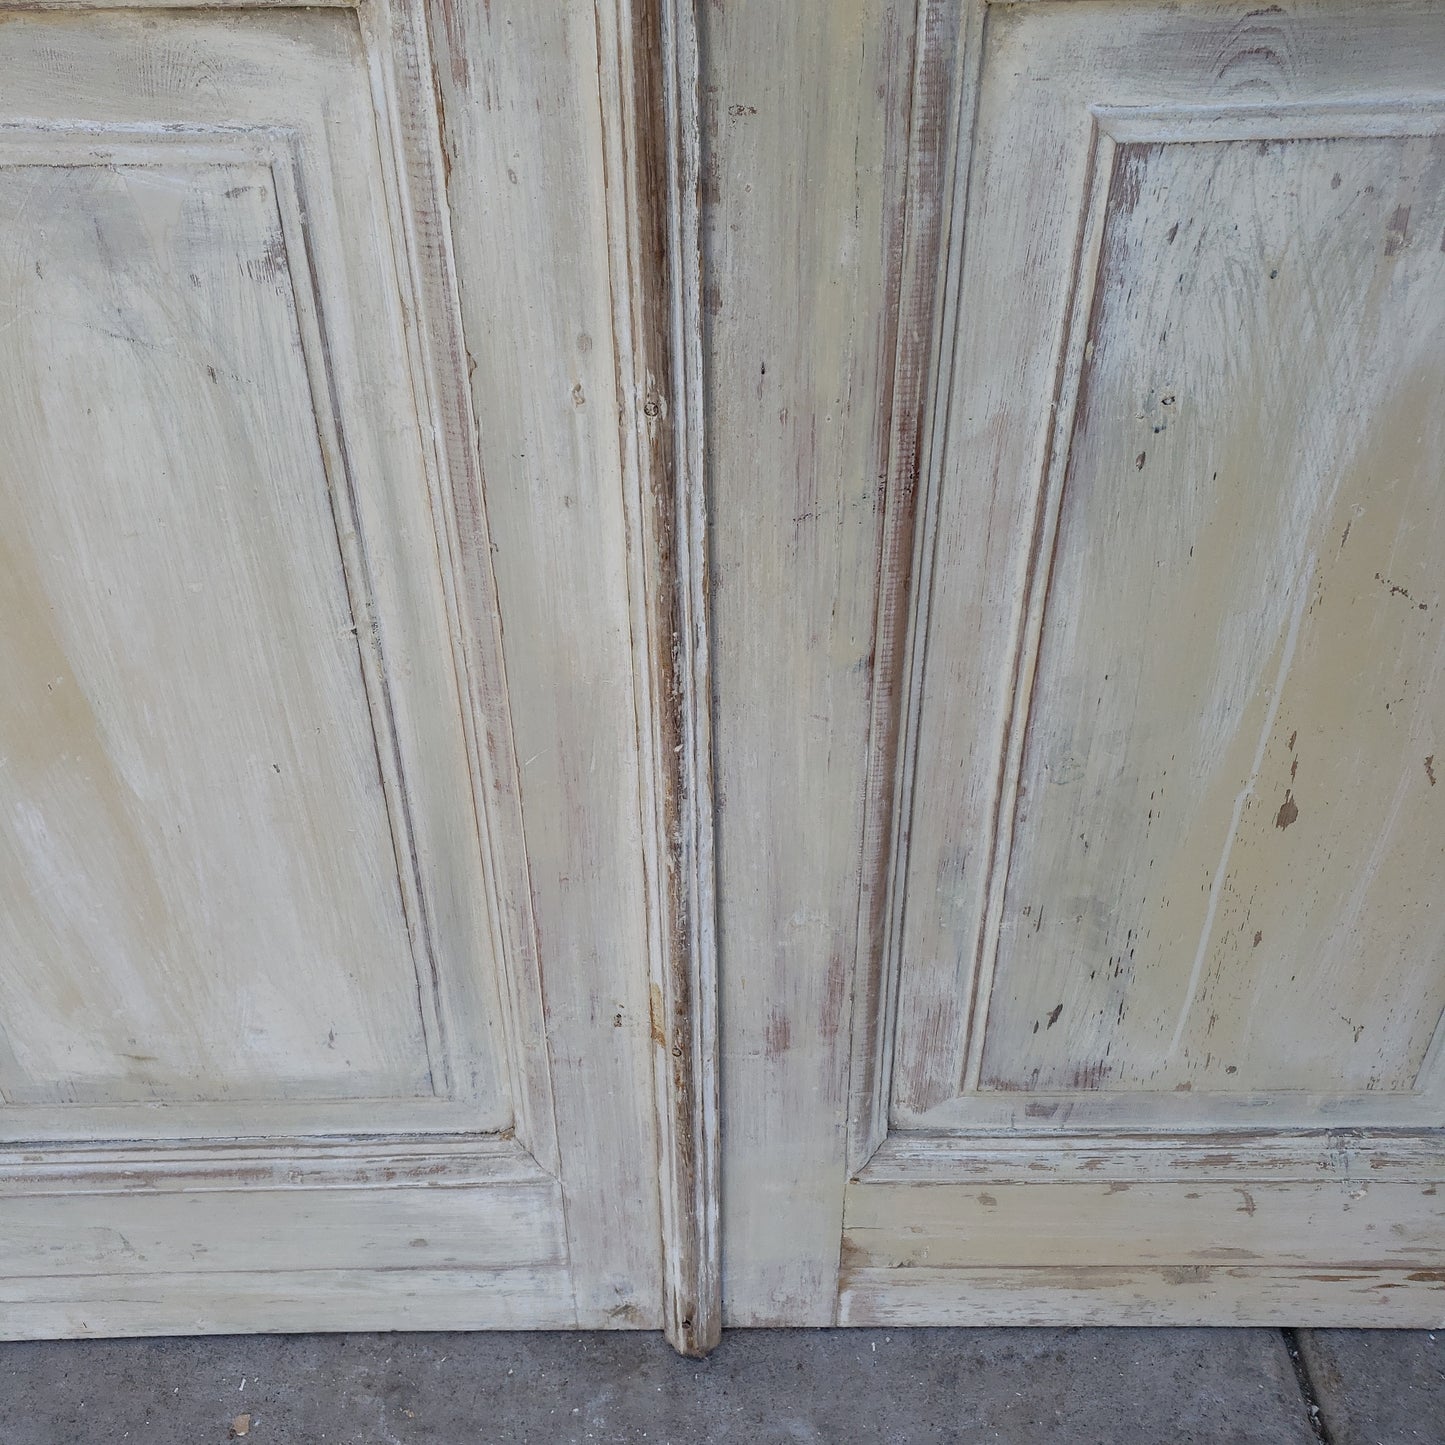 Pair of 8 Lite Washed Wood Antique Doors